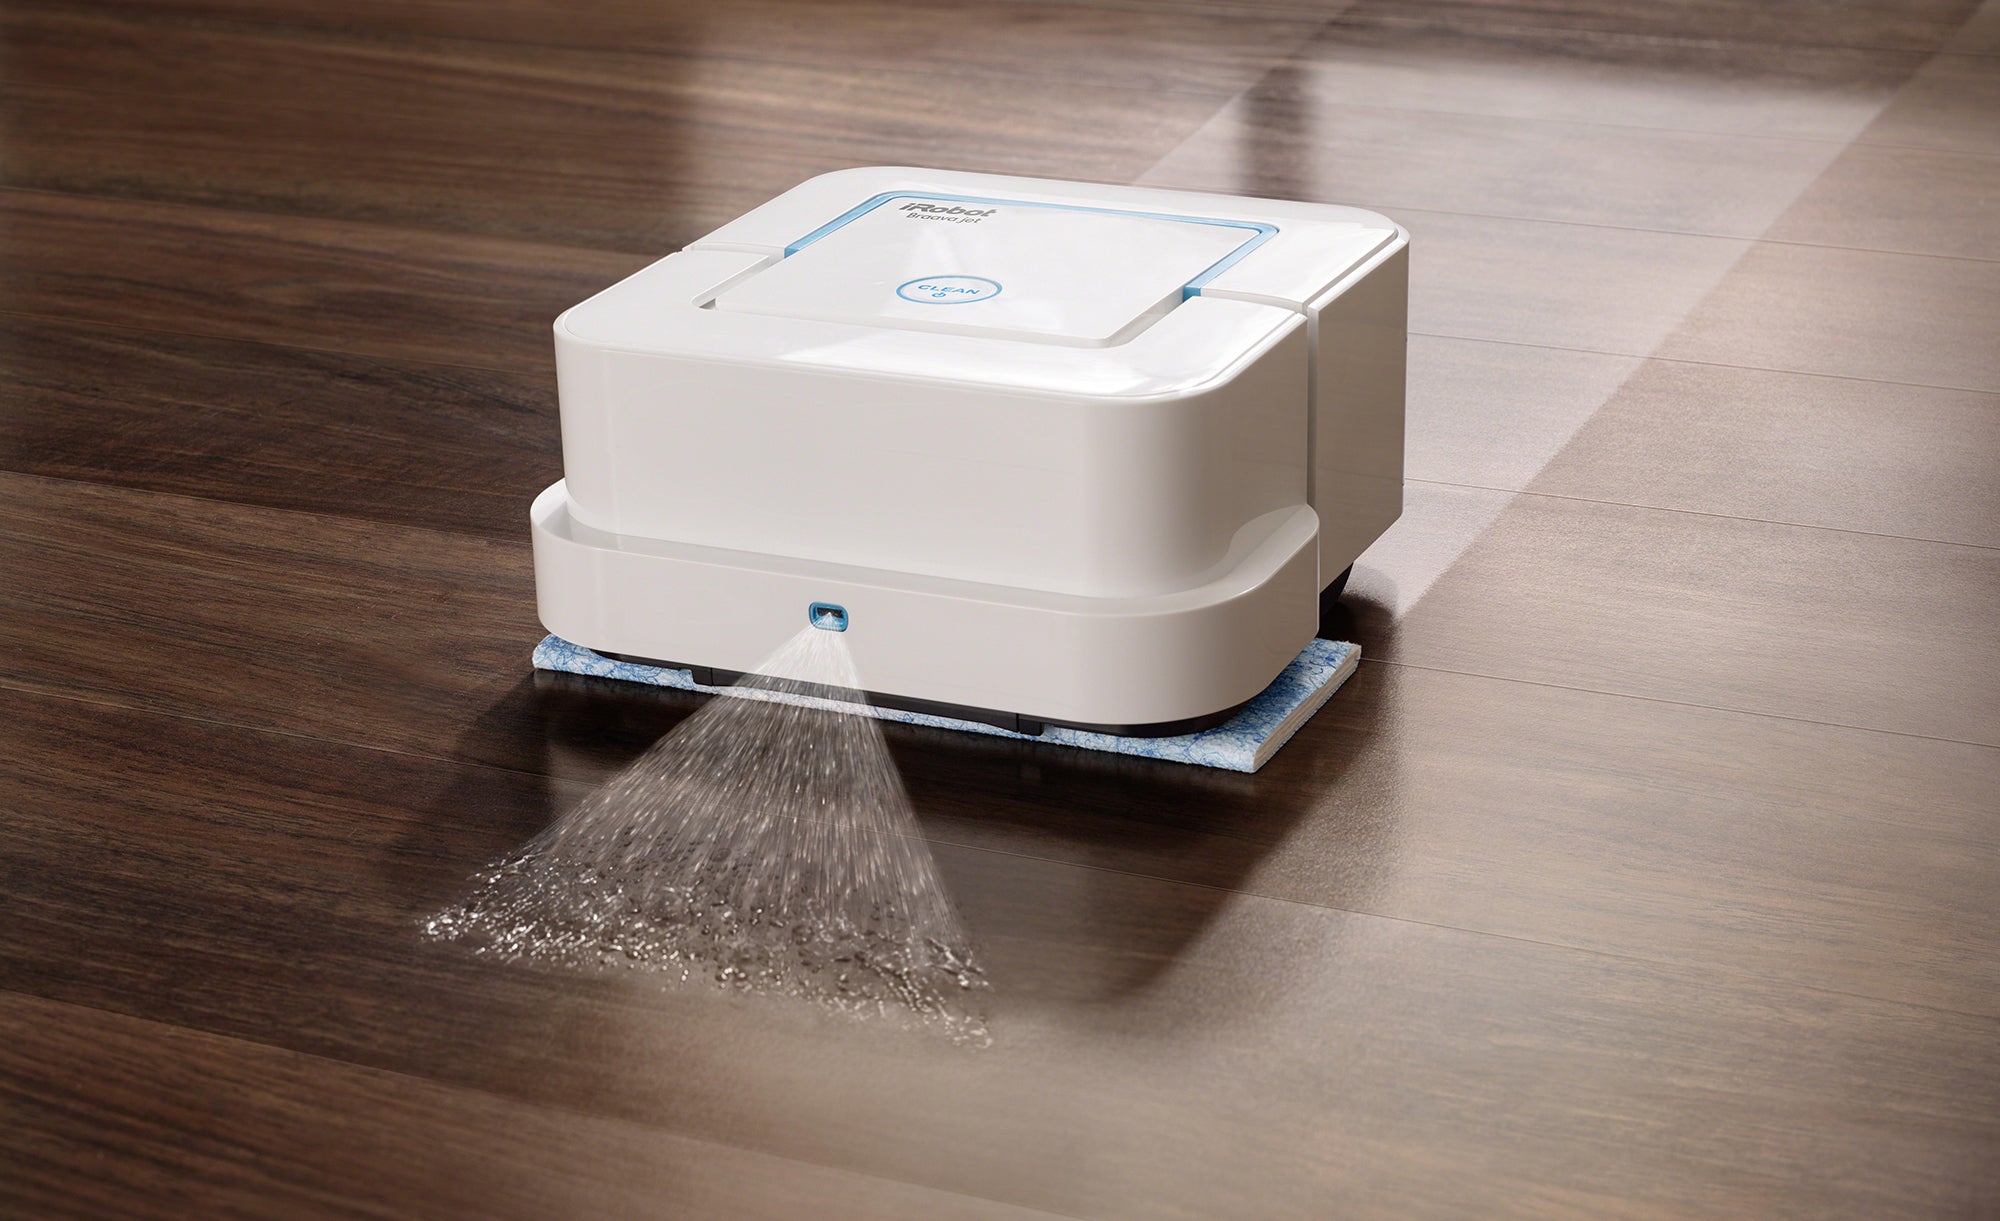 The 199 IRobot Braava Uses Roomba Logic To Mop Kitchens And